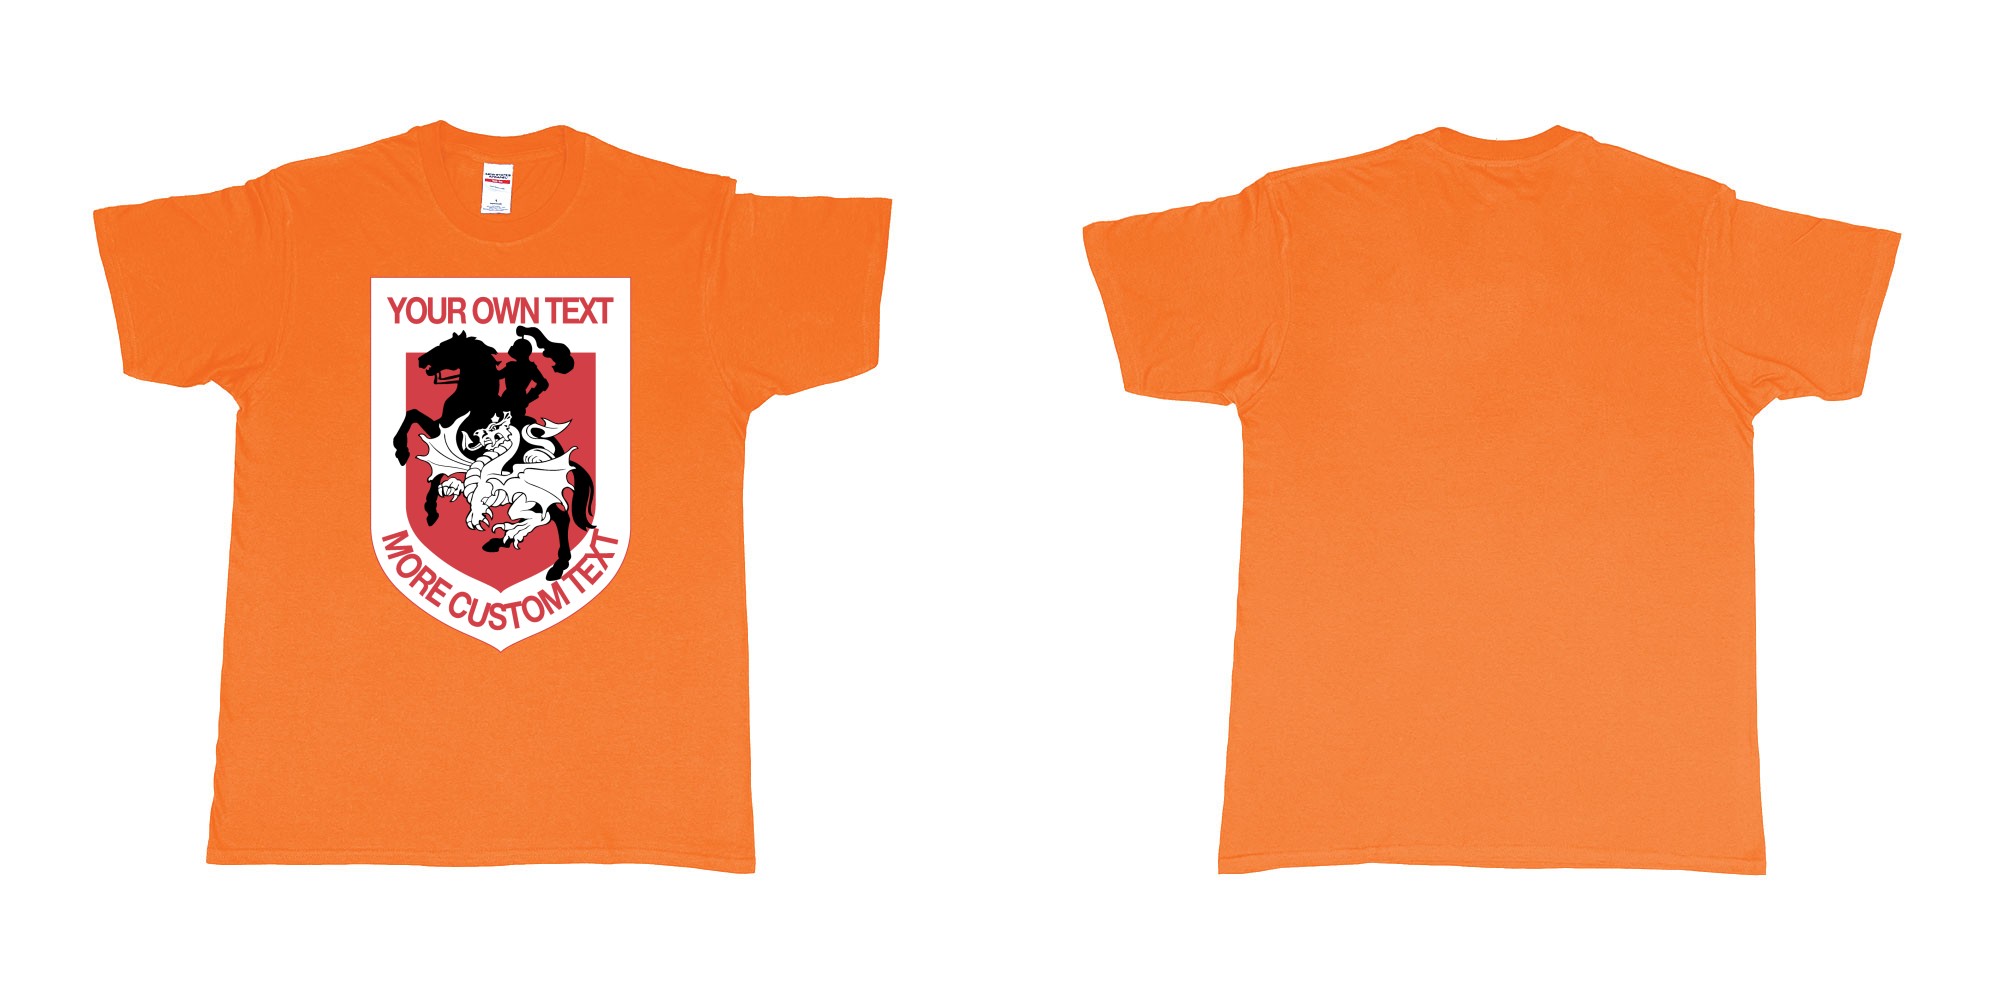 Custom tshirt design st george illawarra dragons custom design in fabric color orange choice your own text made in Bali by The Pirate Way